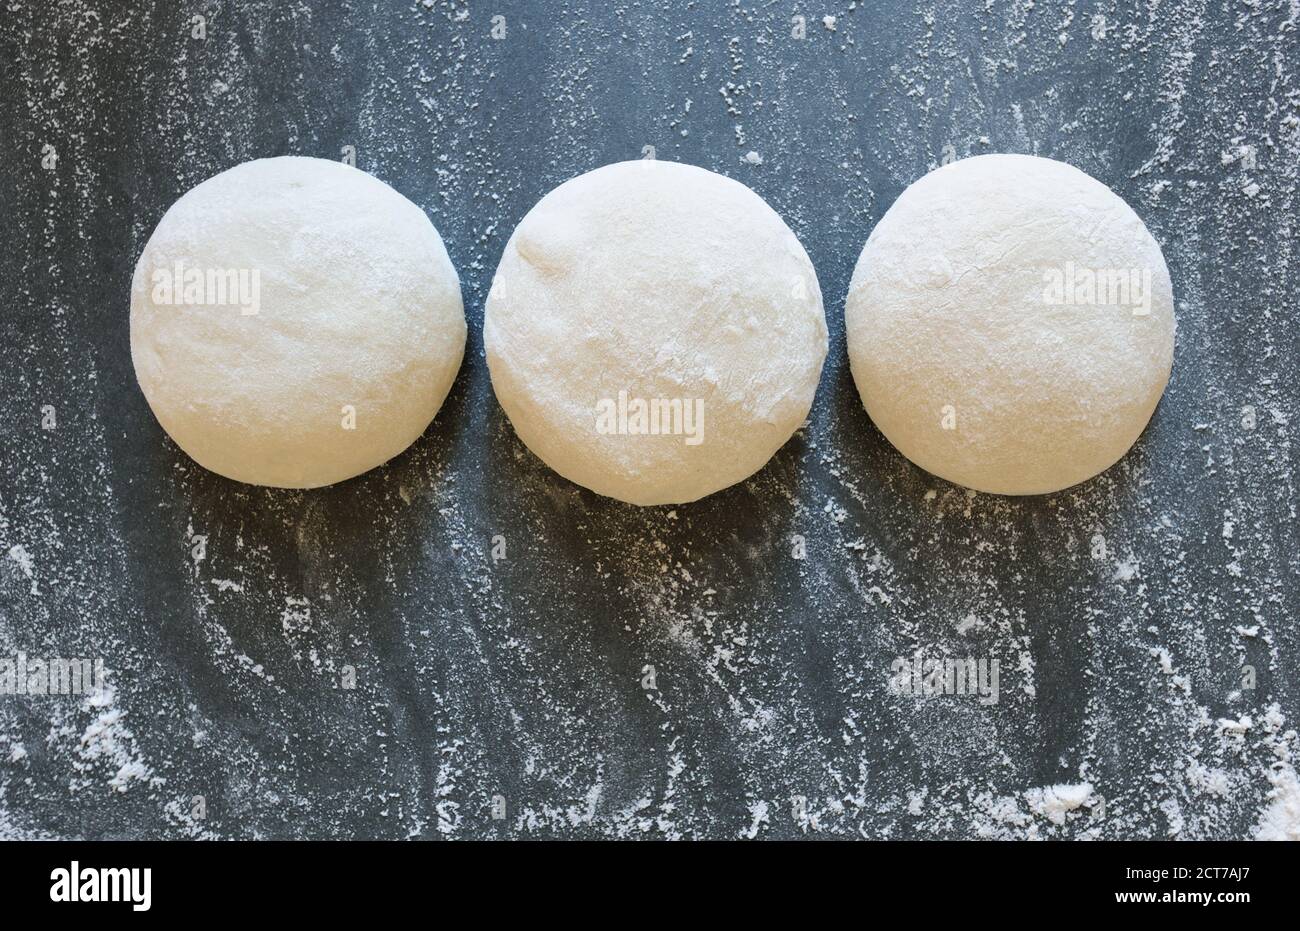 Three balls of fresh homemade wheat dough on kitchen table. Home baking. Dough for pizza cooking, pasta dumplings or bread.Horizontal. Stock Photo